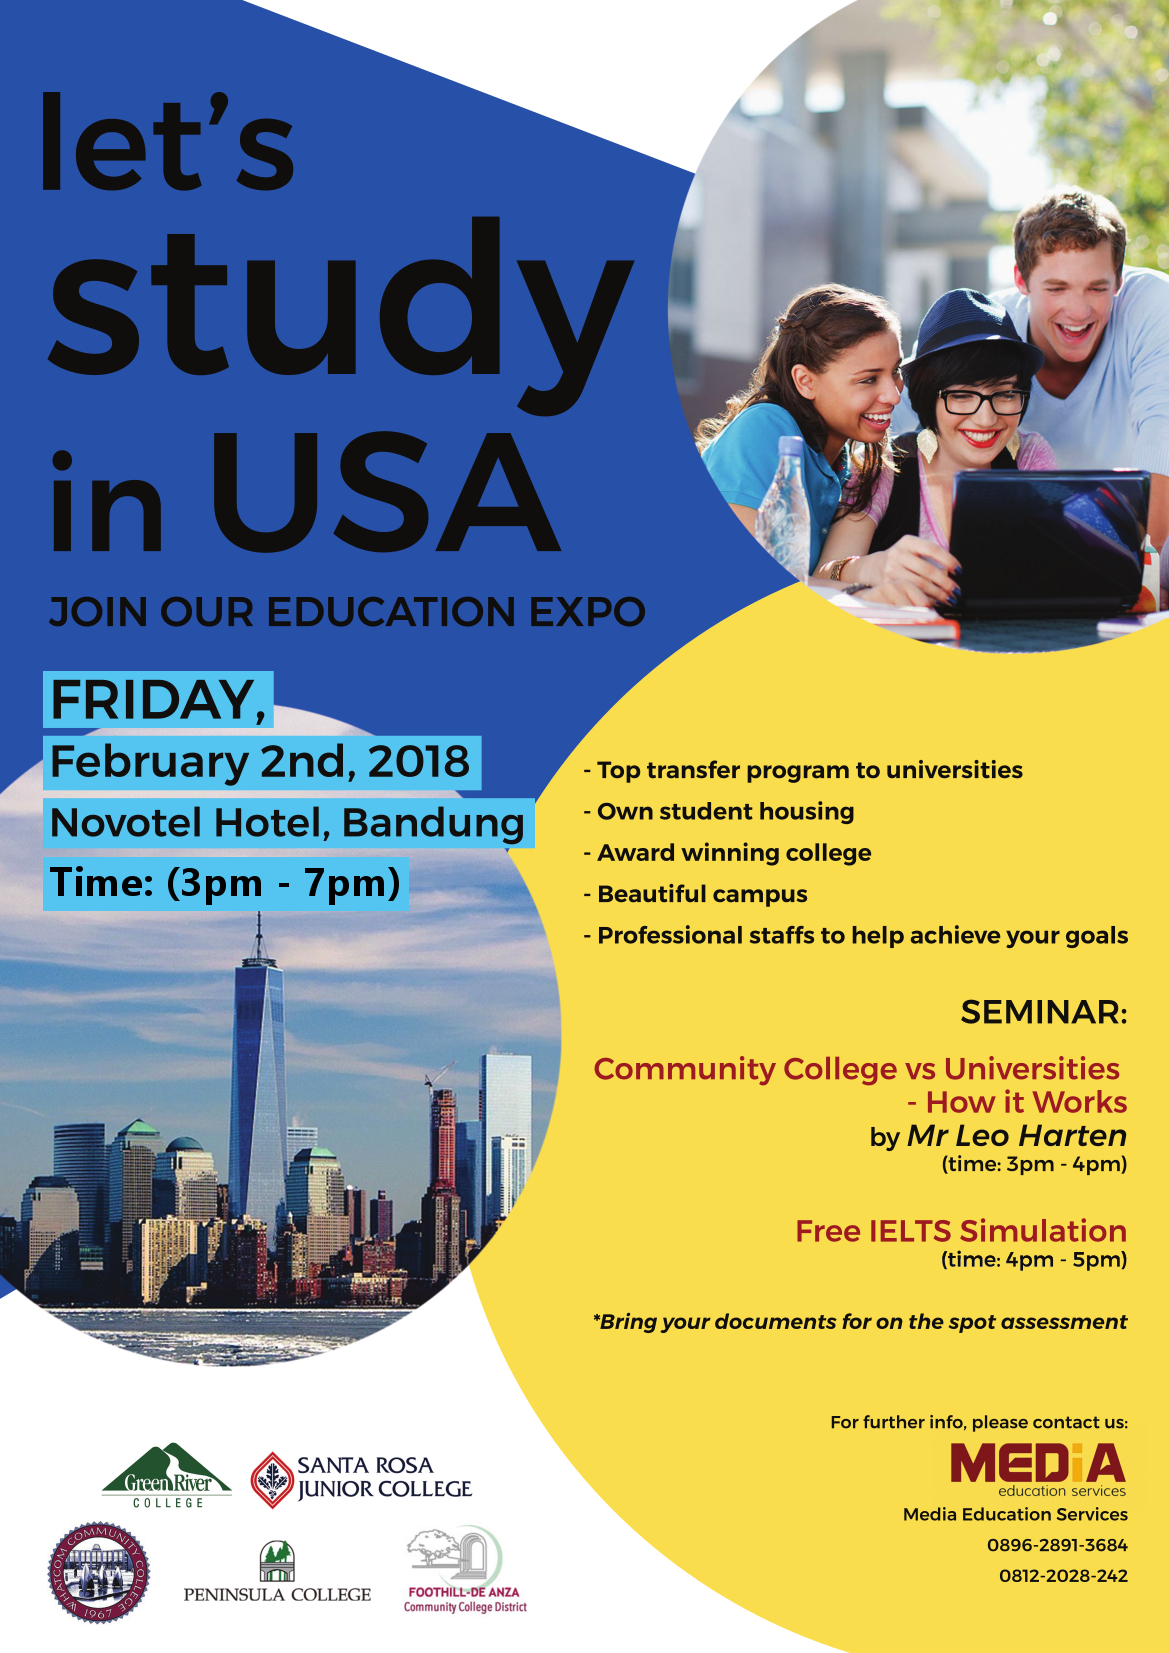 Let's study in USA!